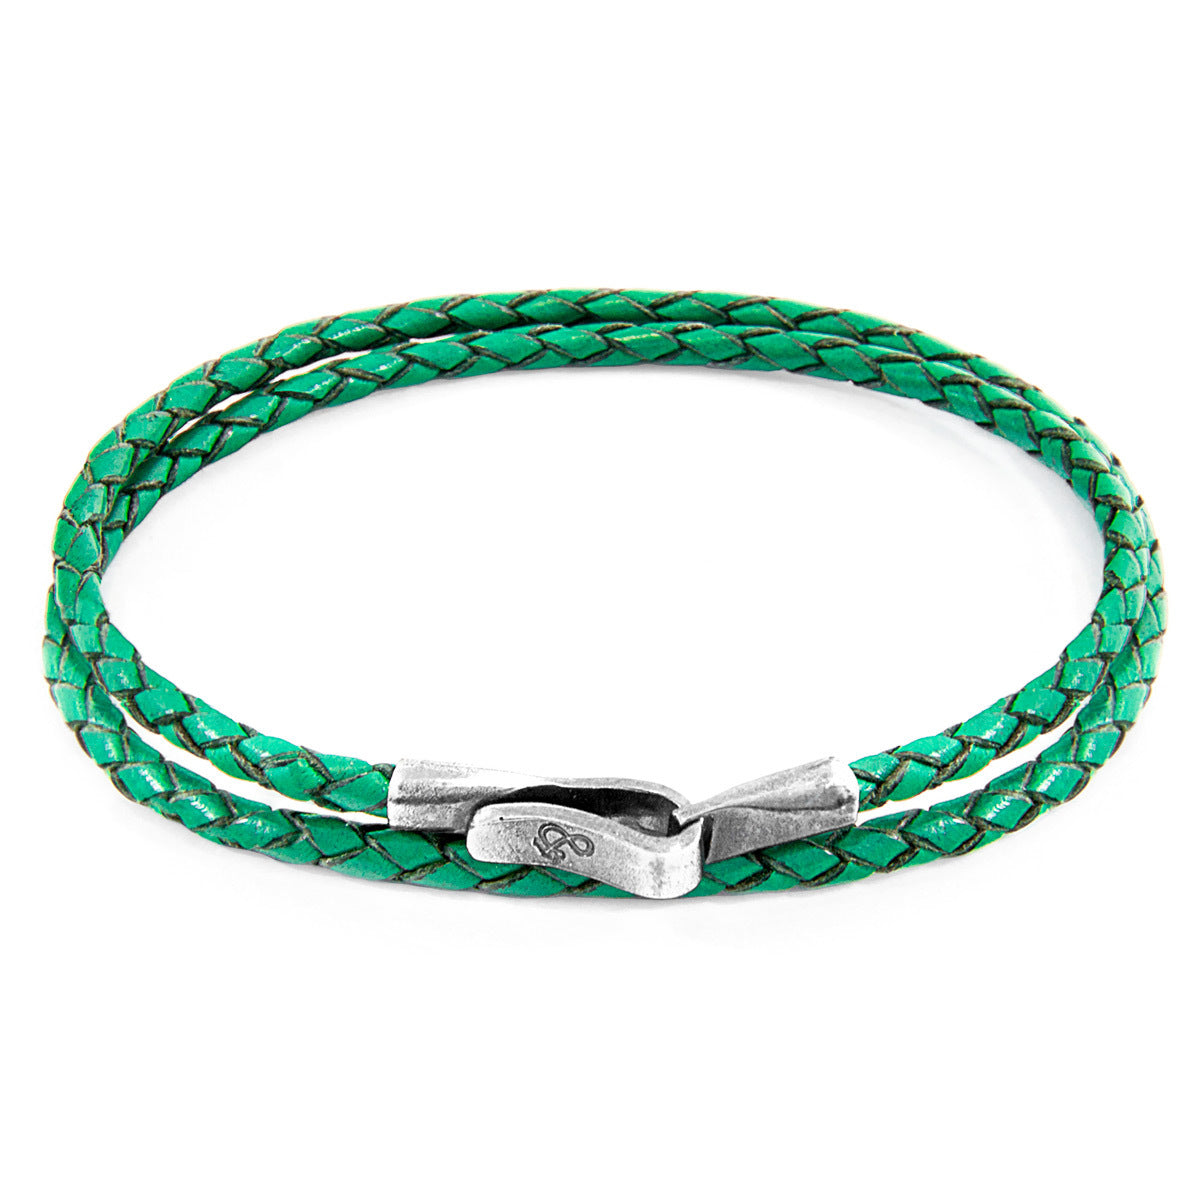 Fern Green Liverpool Silver and Leather Bracelet: Handcrafted in Great Britain with Genuine Braided Leather and Solid Sterling Silver Clasp Bijou Her